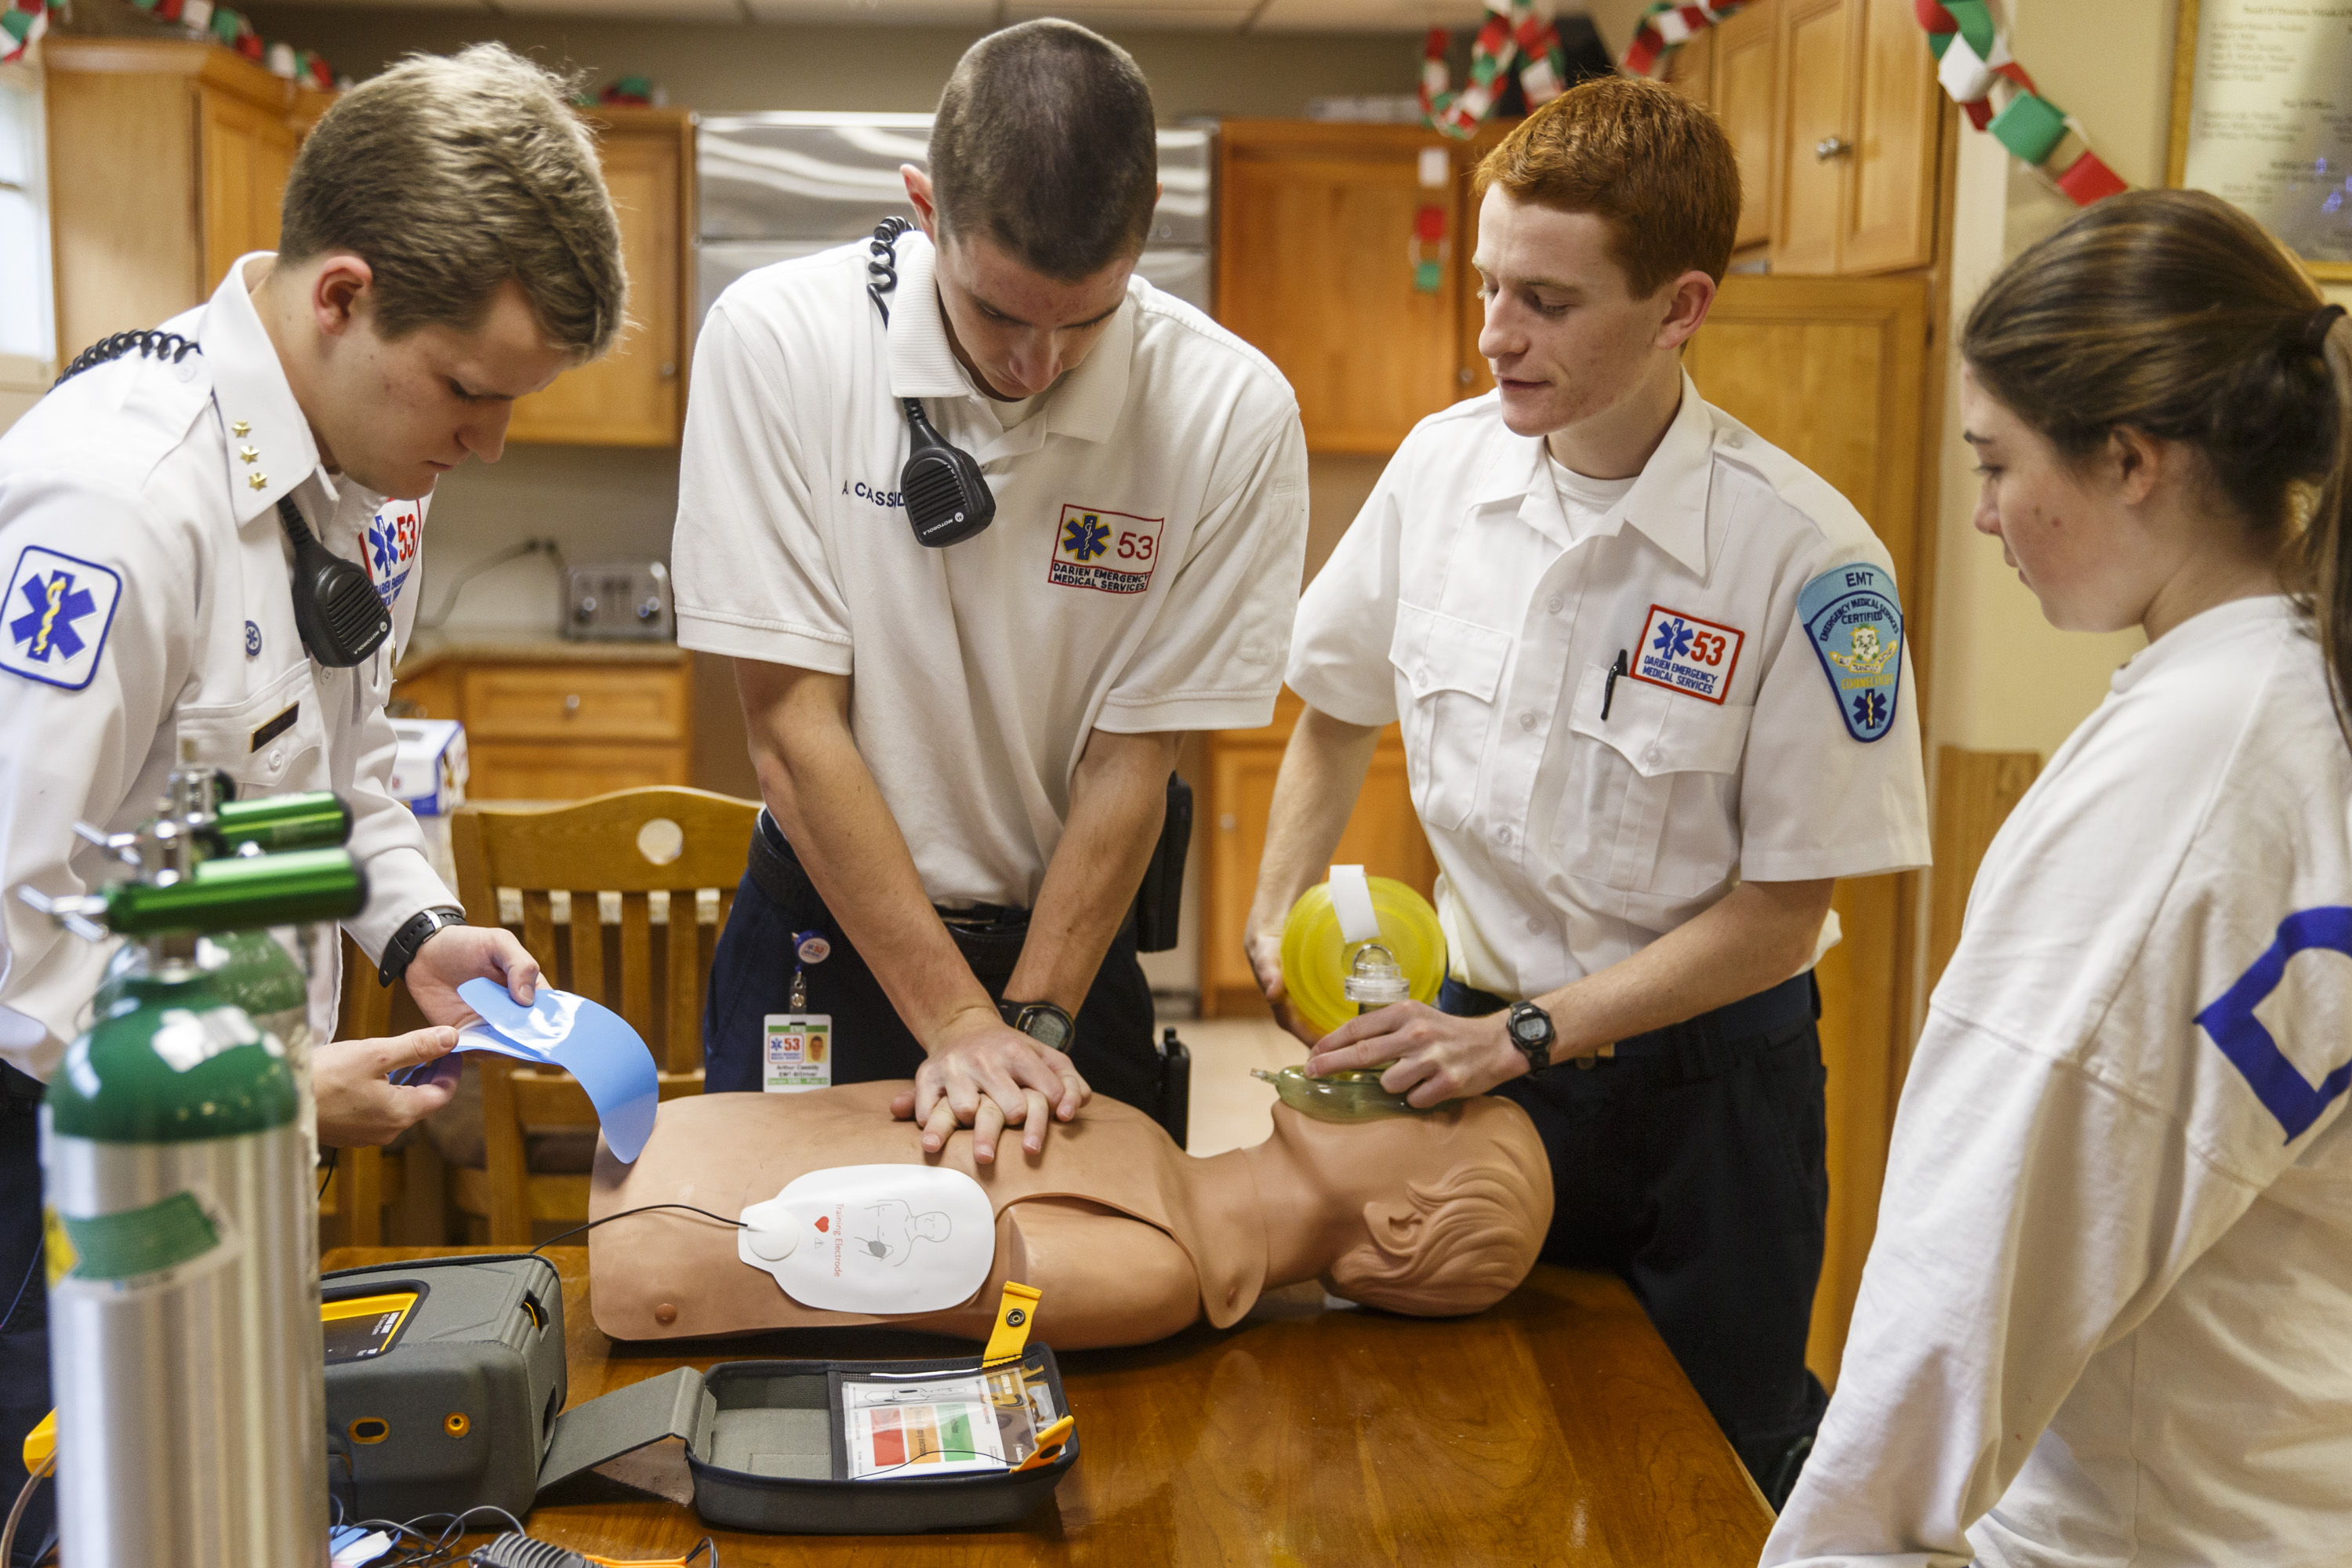 Dec 20, 2014; Darien, CT, USA; EMS Post 53 vice pres of EMS Training and Darien High School swimmer Nicolai Ostberg (left), twin brother post 53 Cruise Officer & Darien High School cross country runner Alex Ostberg (2nd right), EMS student president & Darien High School track & field runner Arthur Cassidy (2nd left) and EMS Rider, high school student Emily Gianunzio (right) practice their CPR skills at Post 53 in Darien, CT Saturday morning during their on-call shift. Mandatory Credit: David Butler II-USA TODAY Sports ORG XMIT: US 132289 Alex Ostberg 12/20/2014 [Via MerlinFTP Drop]